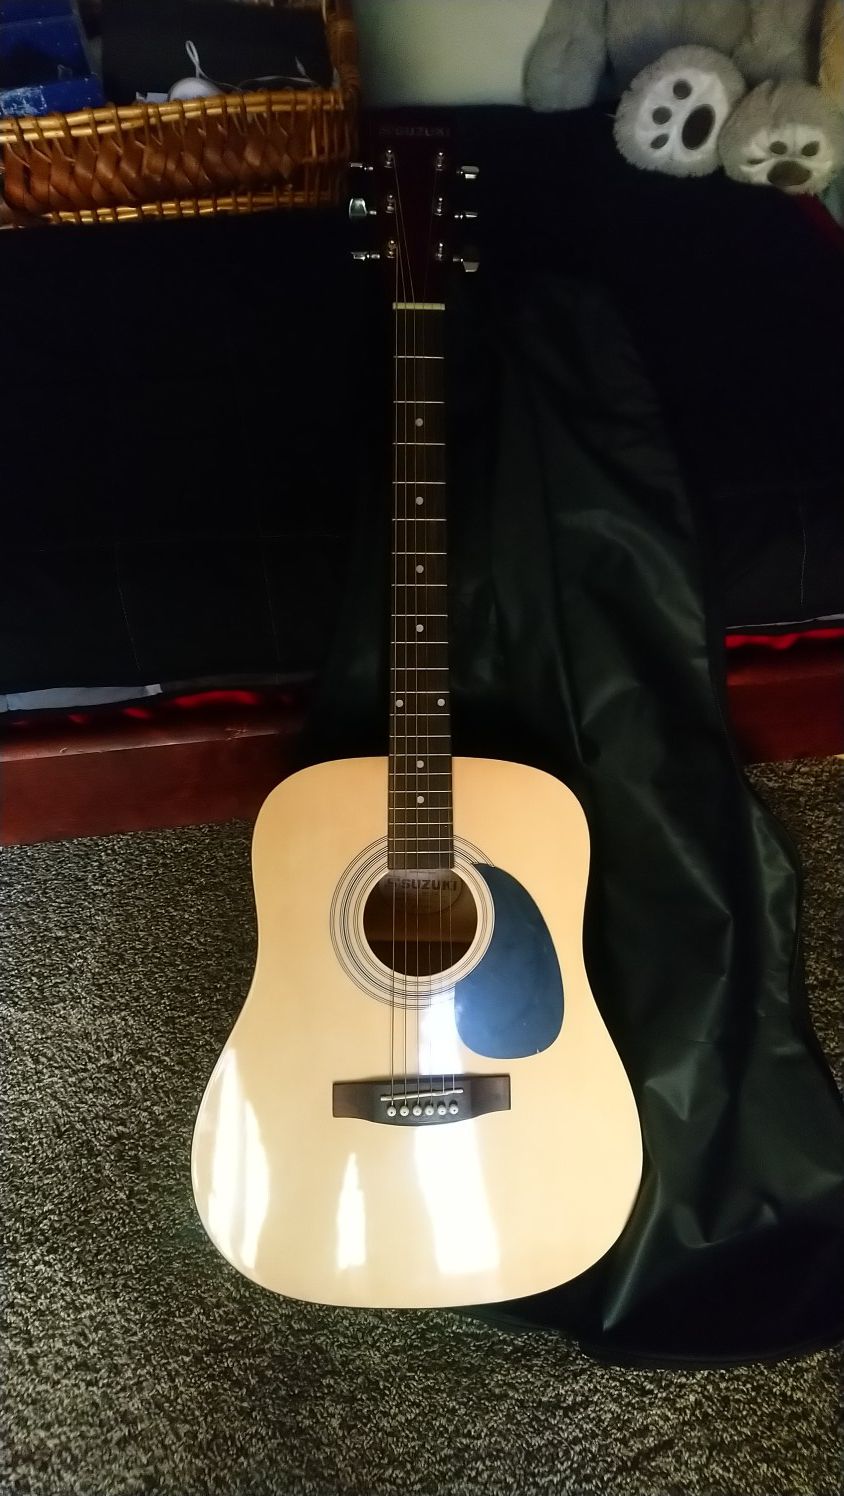 Suzuki guitar. Never used. Perfect for beginners.